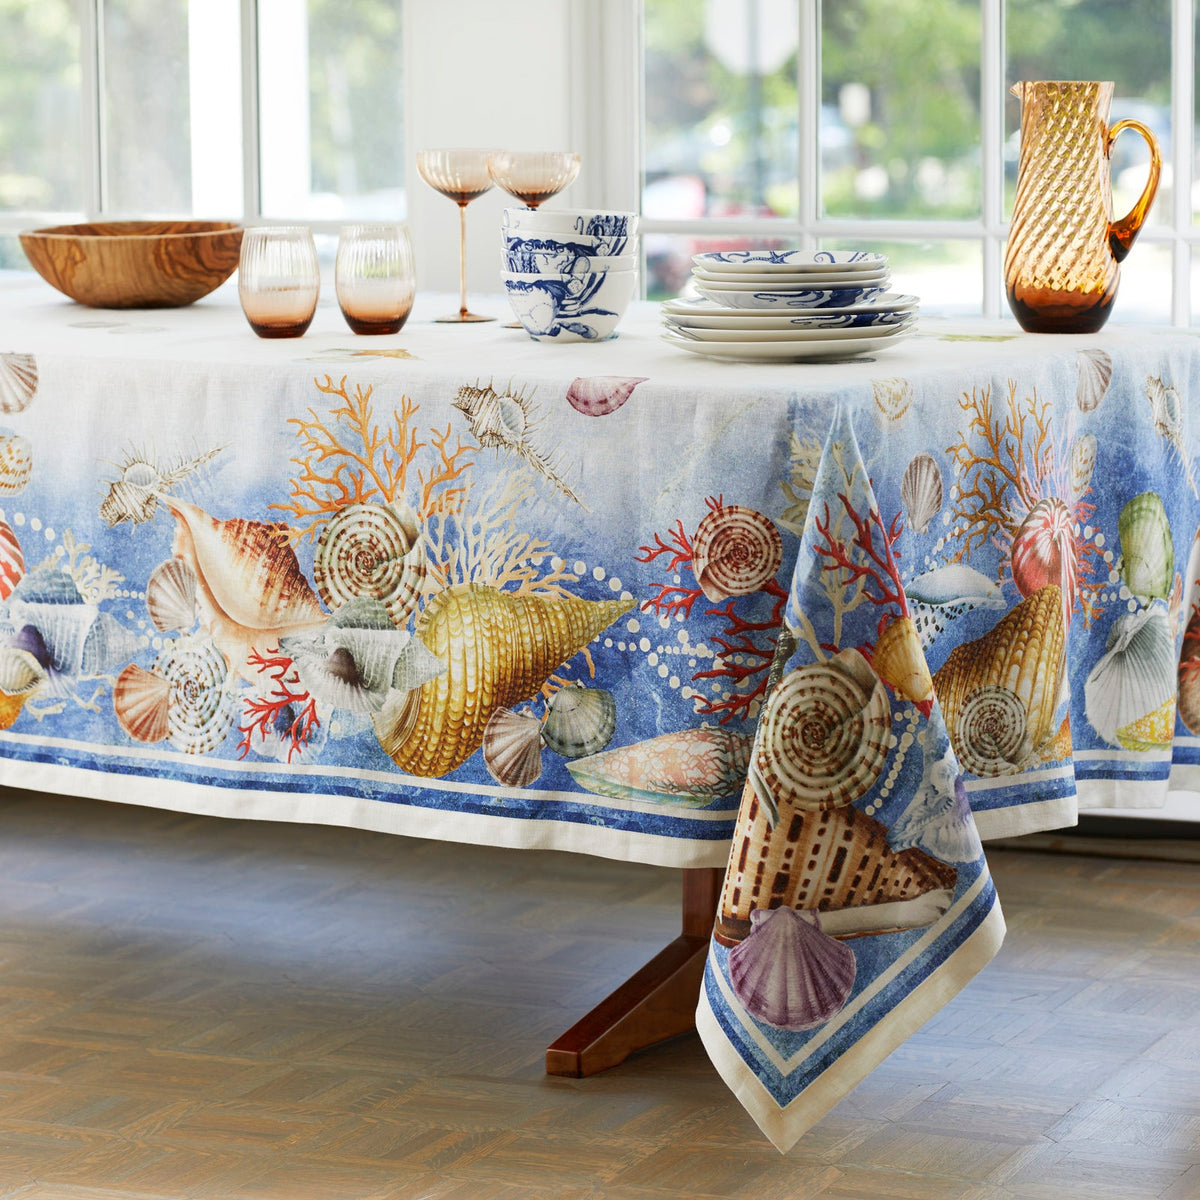 A Sanibel Linen Tablecloth from TTT, blue and white.